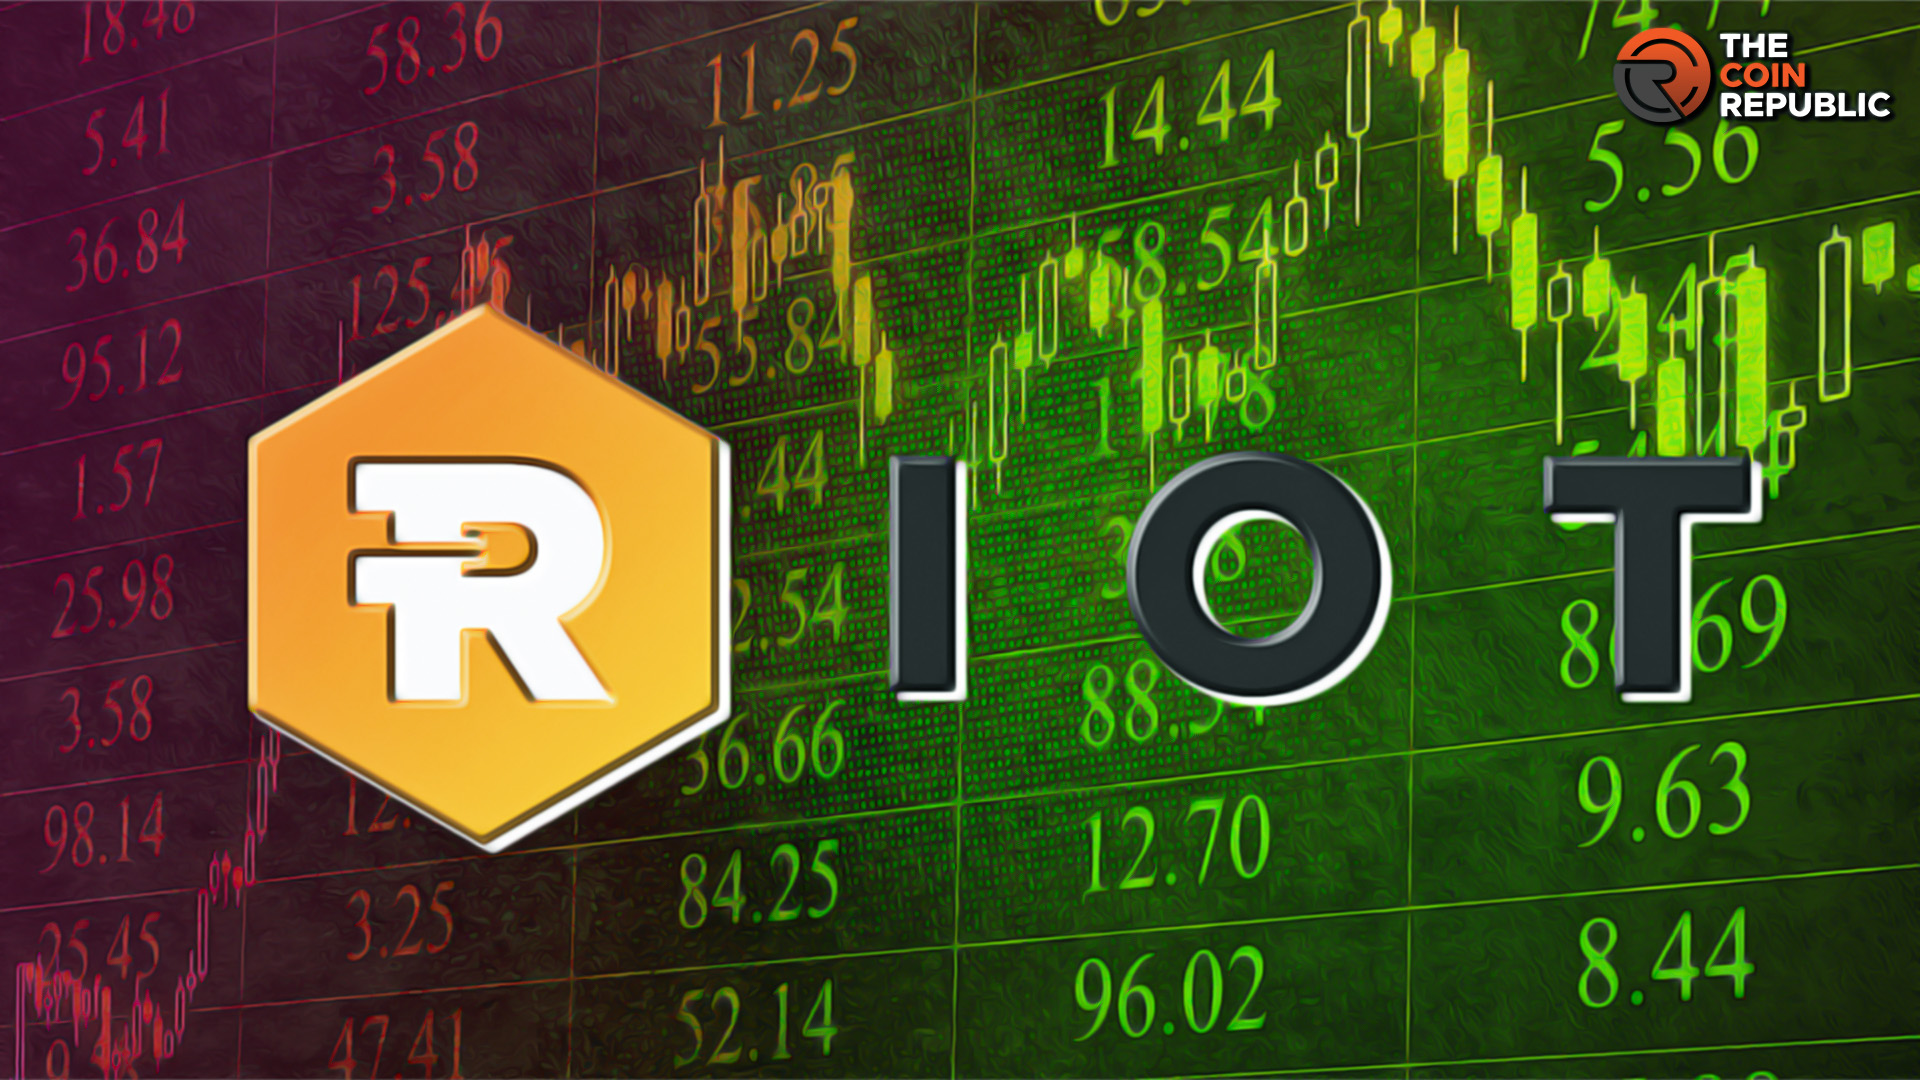 Riot Platforms Inc: Will RIOT Stock Price Sustain For $12.65?